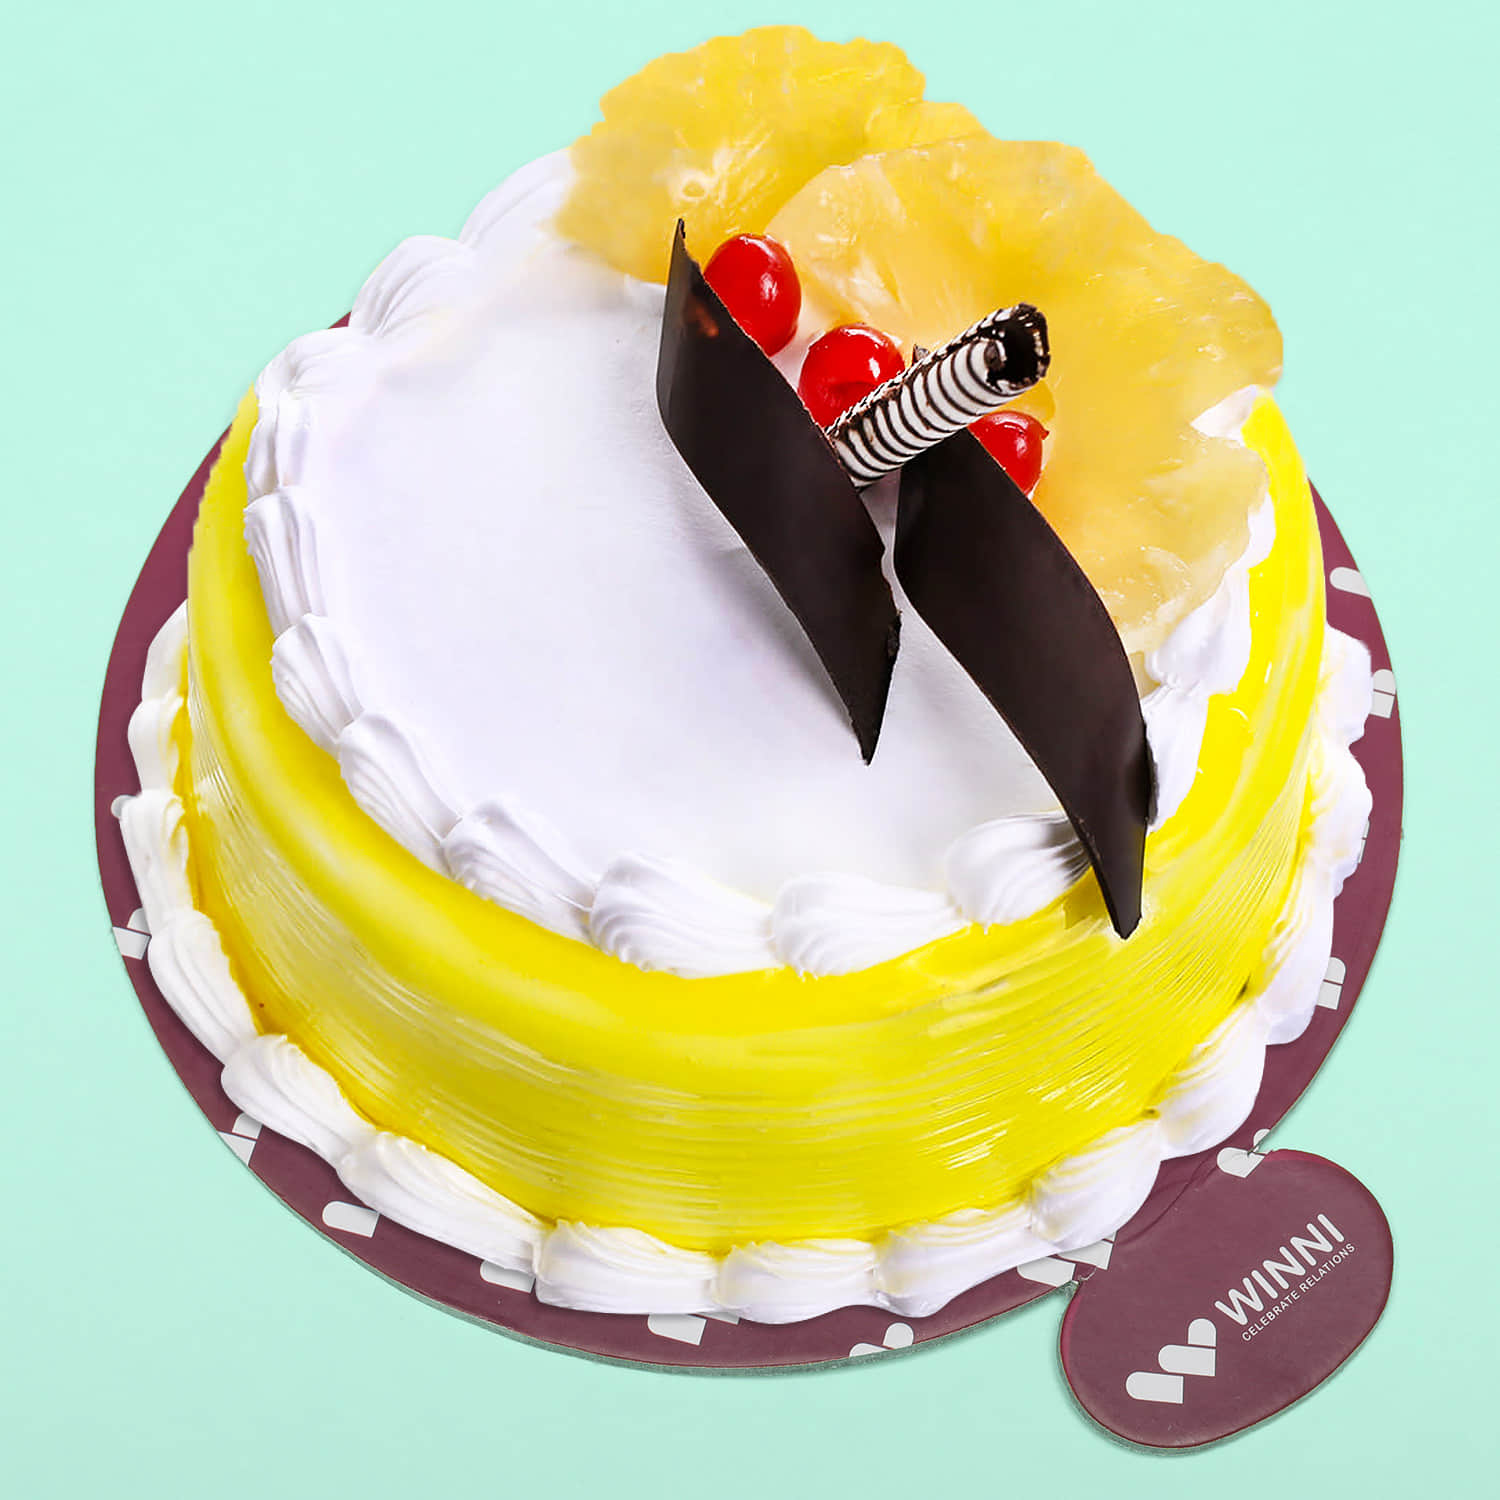 Buy Online | Number Formation Racing Track Shape Cake | Winni | Winni.in